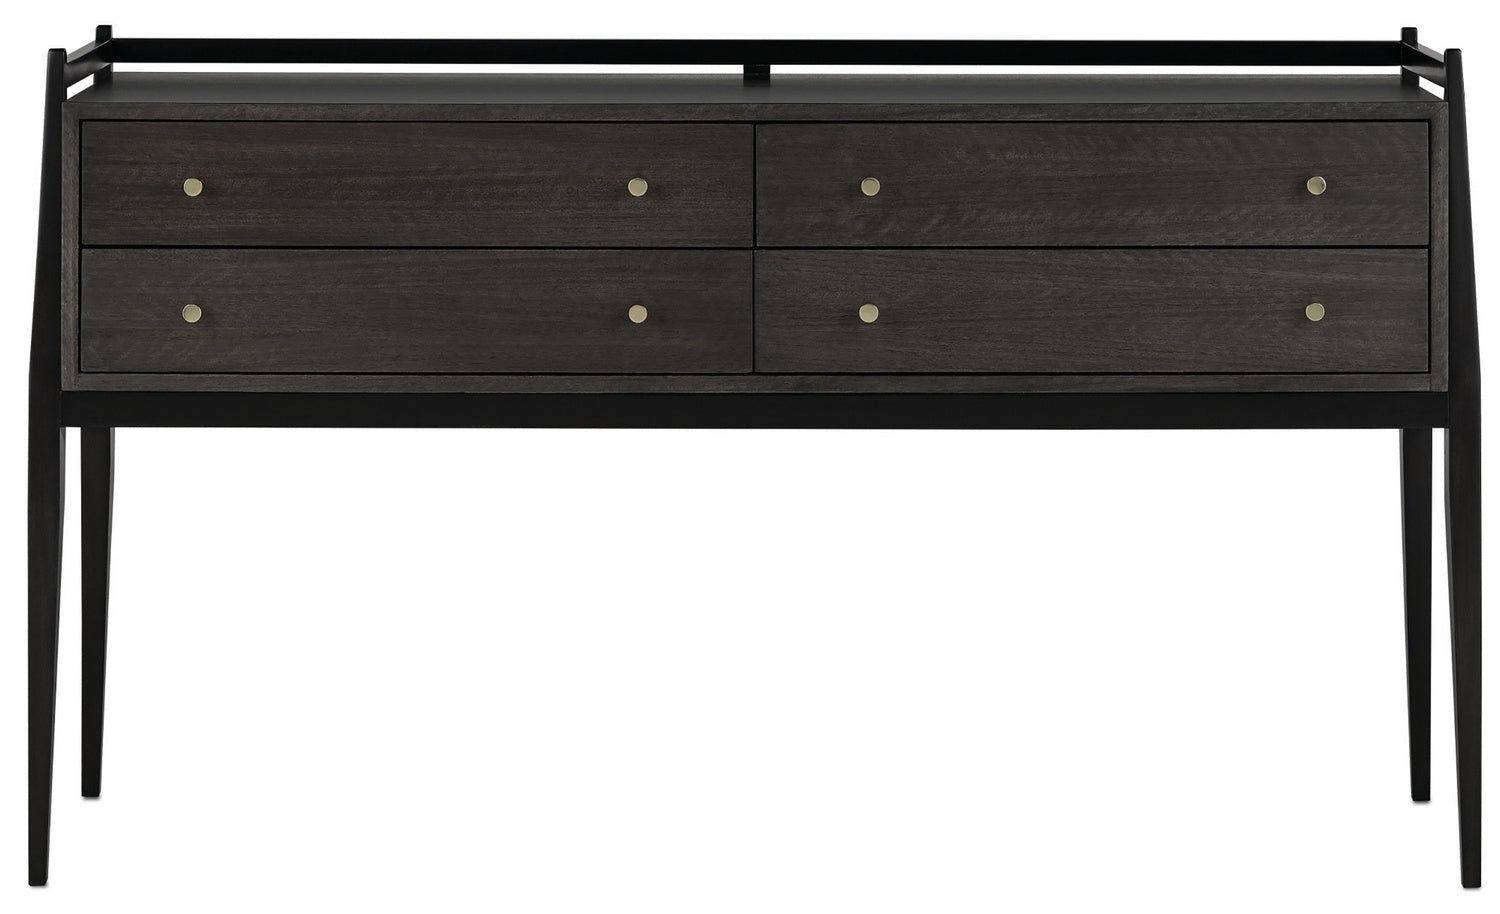 Console Table from the Selig collection in Dark Mink/Riverstone Gray/Polished Brass finish